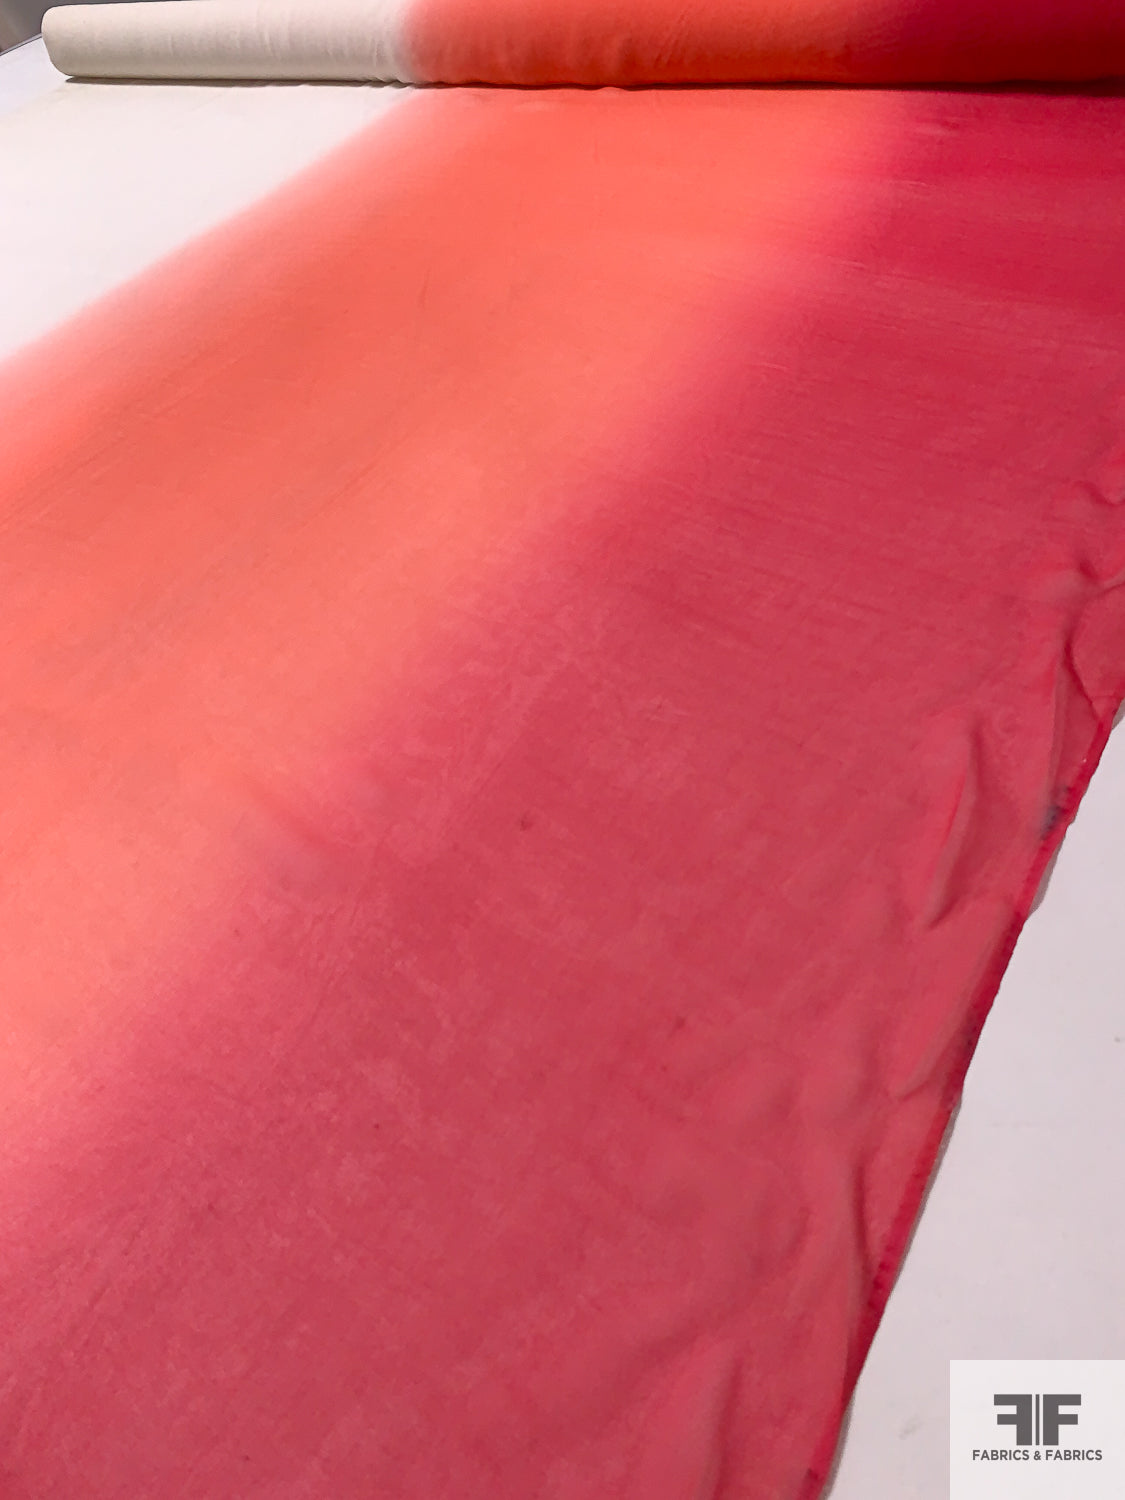 Ombré Printed Silk Chiffon - Raspberry Red / Pink-Coral / Off-White